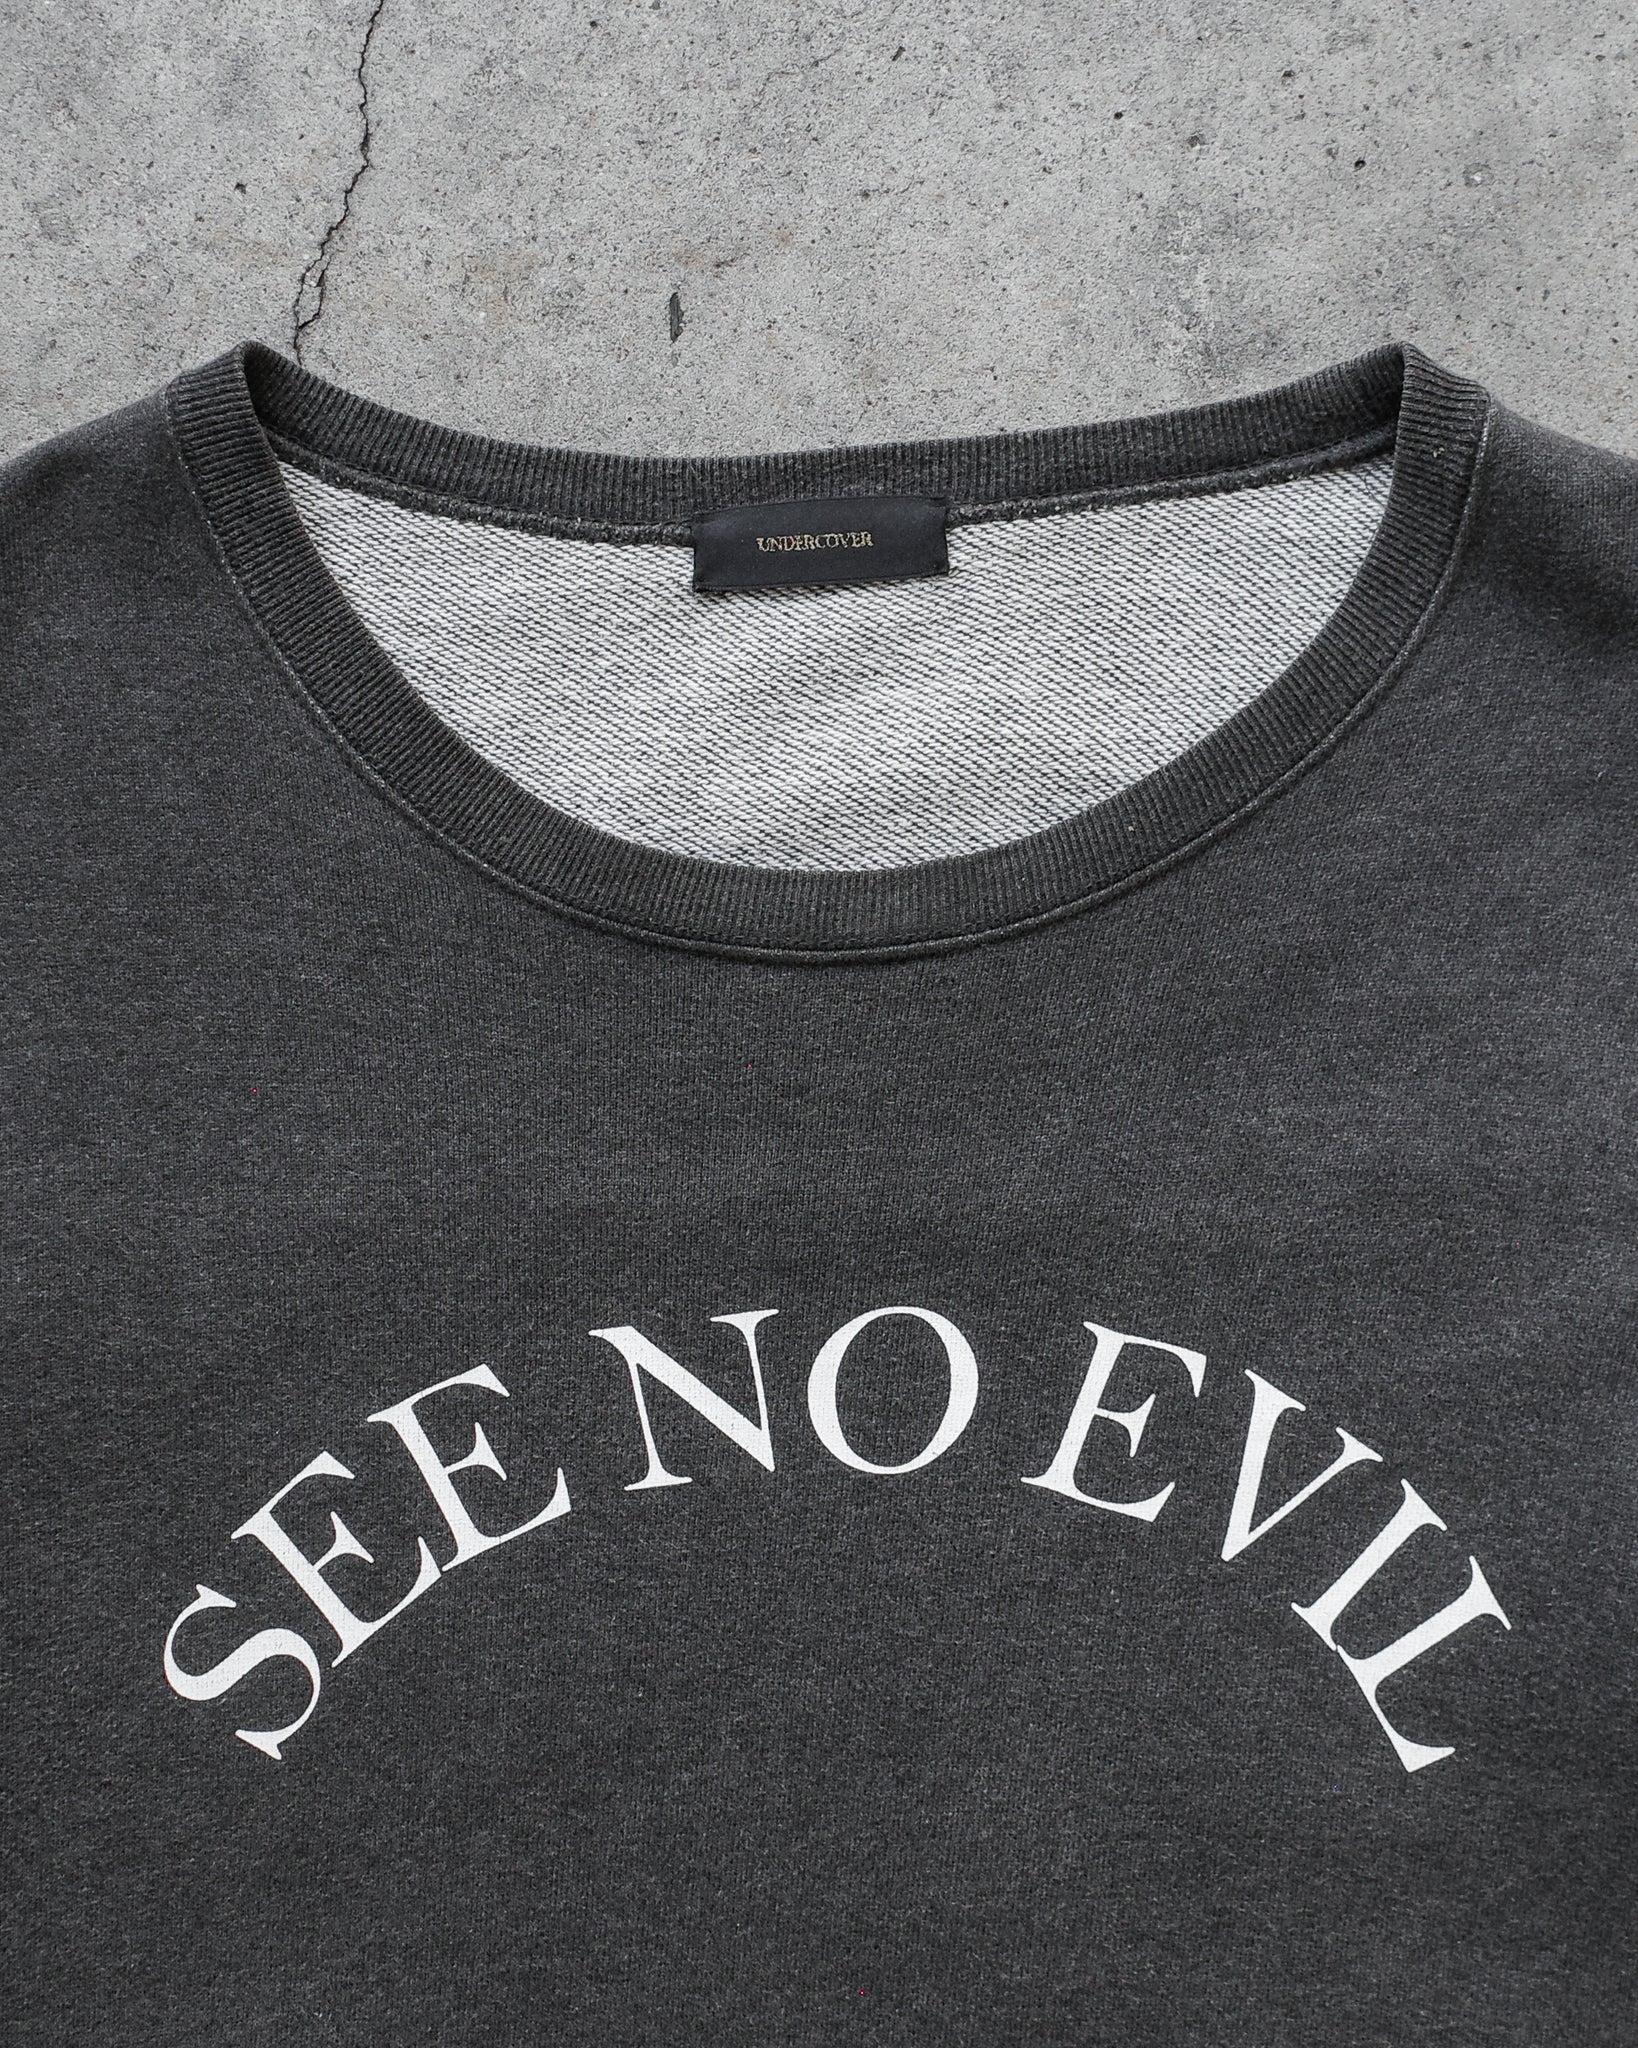 Undercover SS15 "See No Evil" Sweatshirt